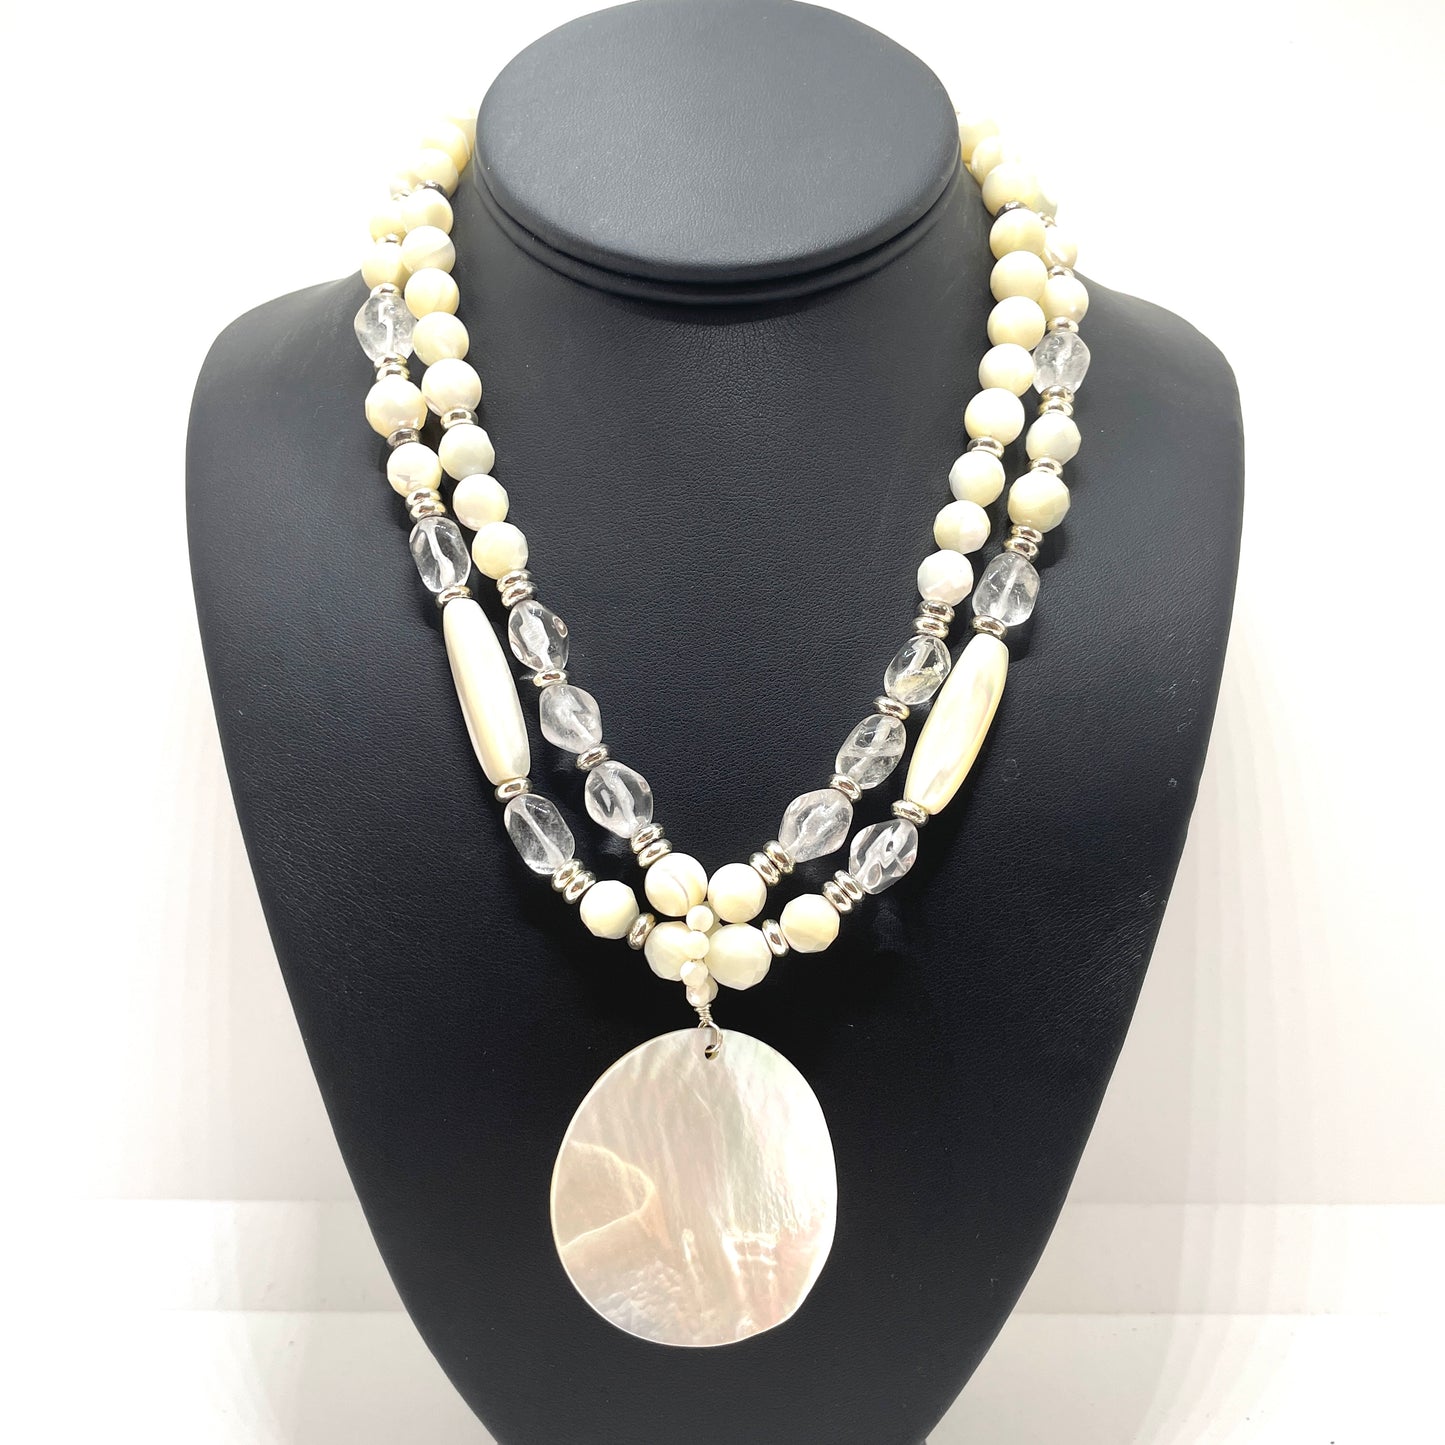 Vintage White Necklace with Large Pendant